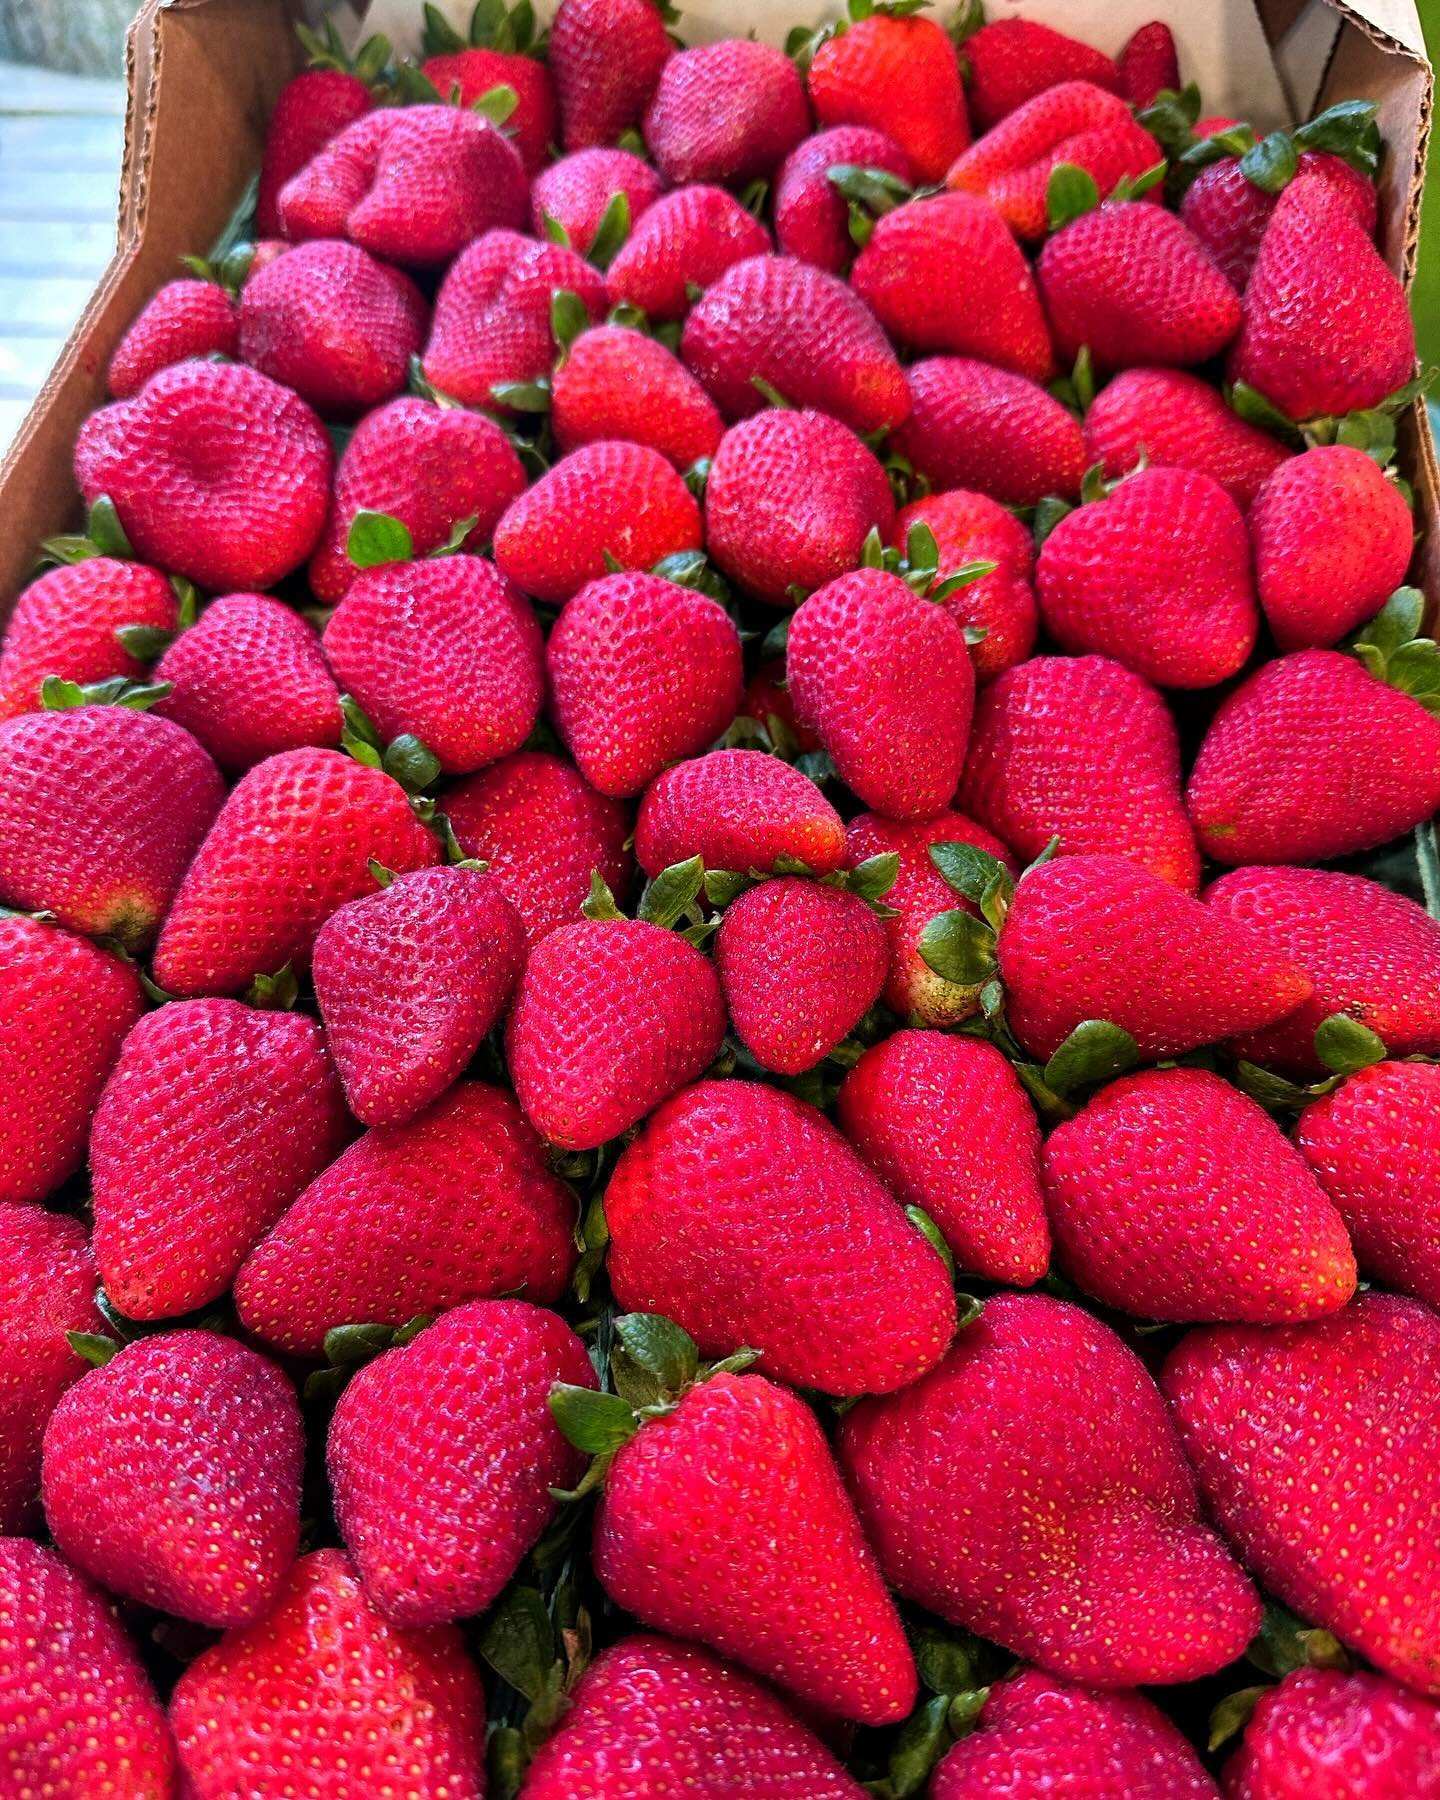 About to pass out in this heat trying to restock, look at these strawberries, have mercy 🥰😌🥹